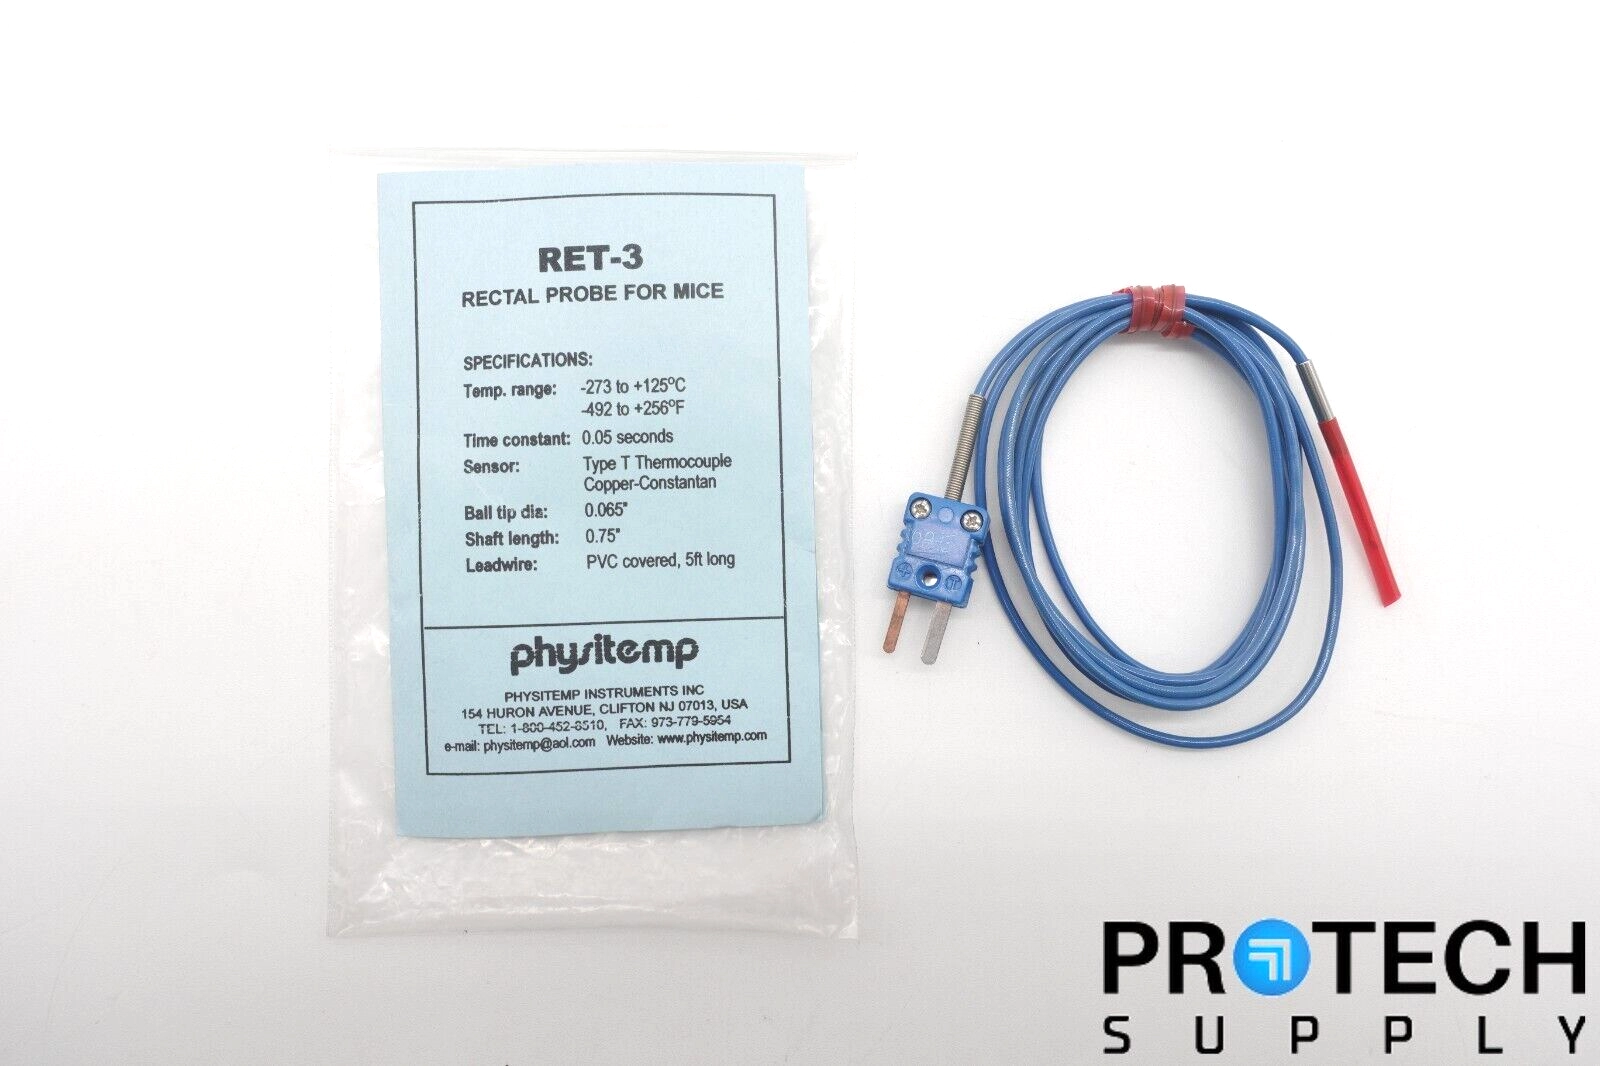 Physitemp RET-3 Rectal Probe for Mice NEW with WAR